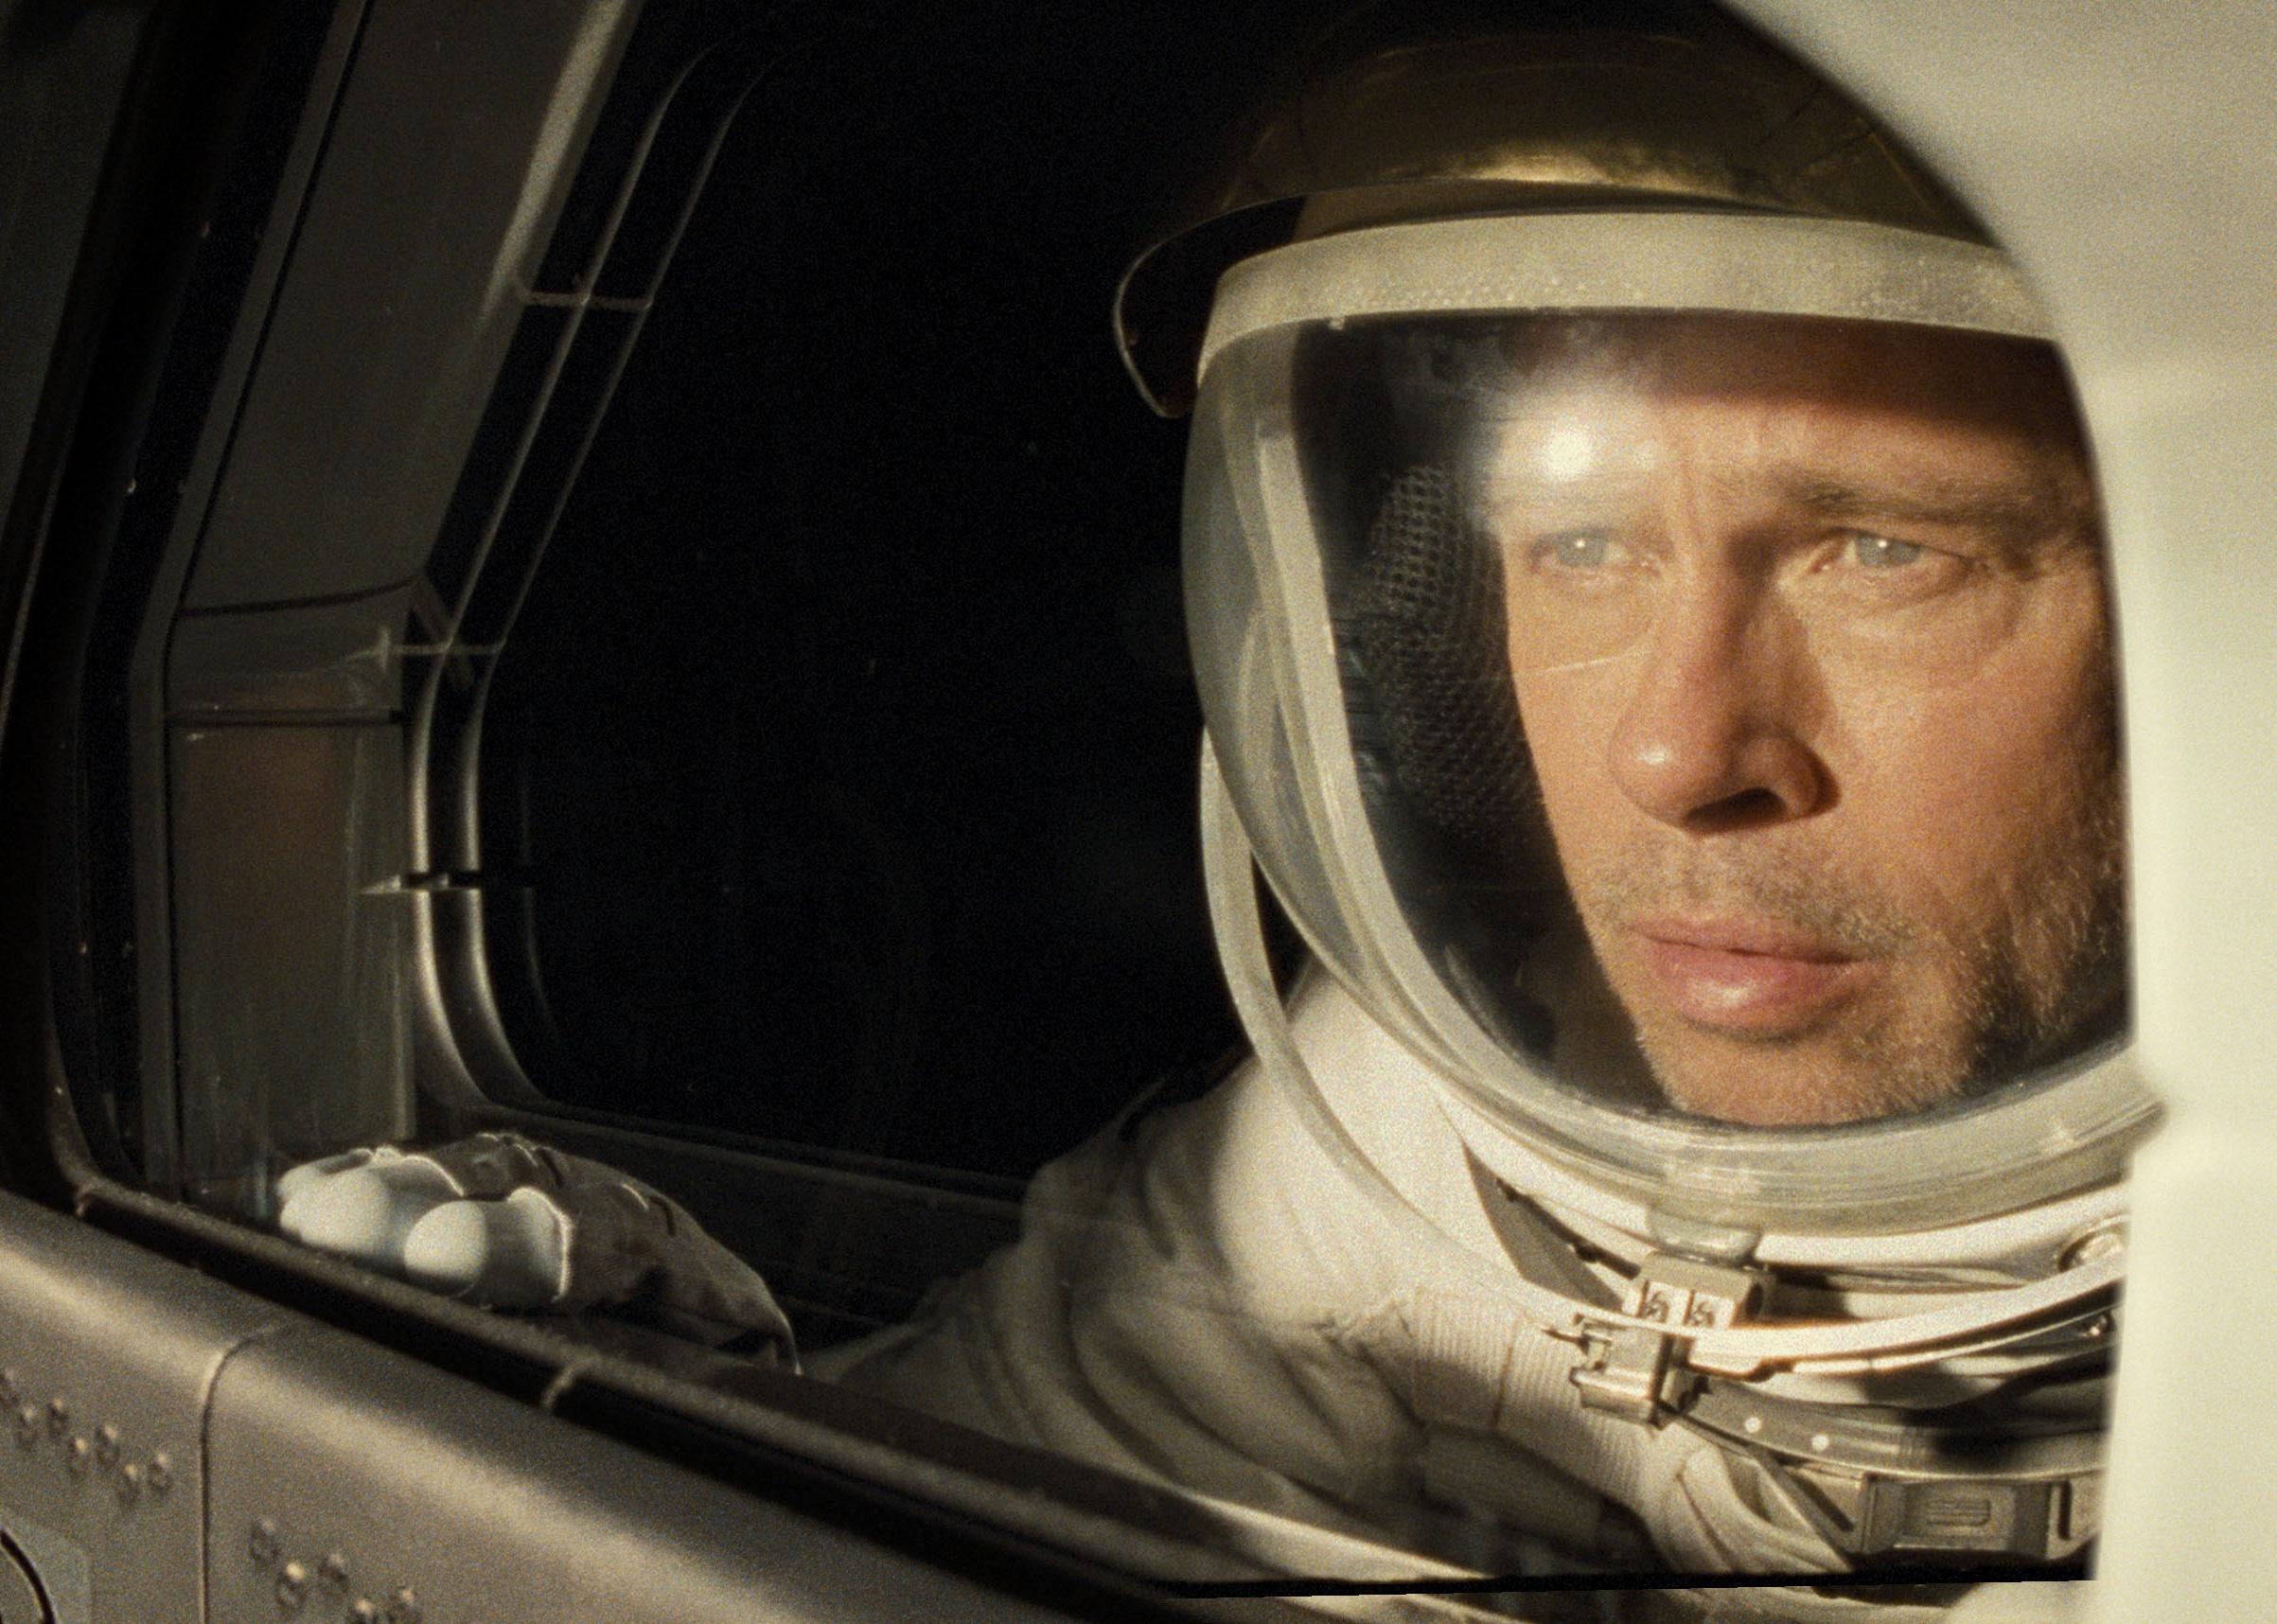 Brad Pitt in a spacesuit looking out the window of a spaceship.